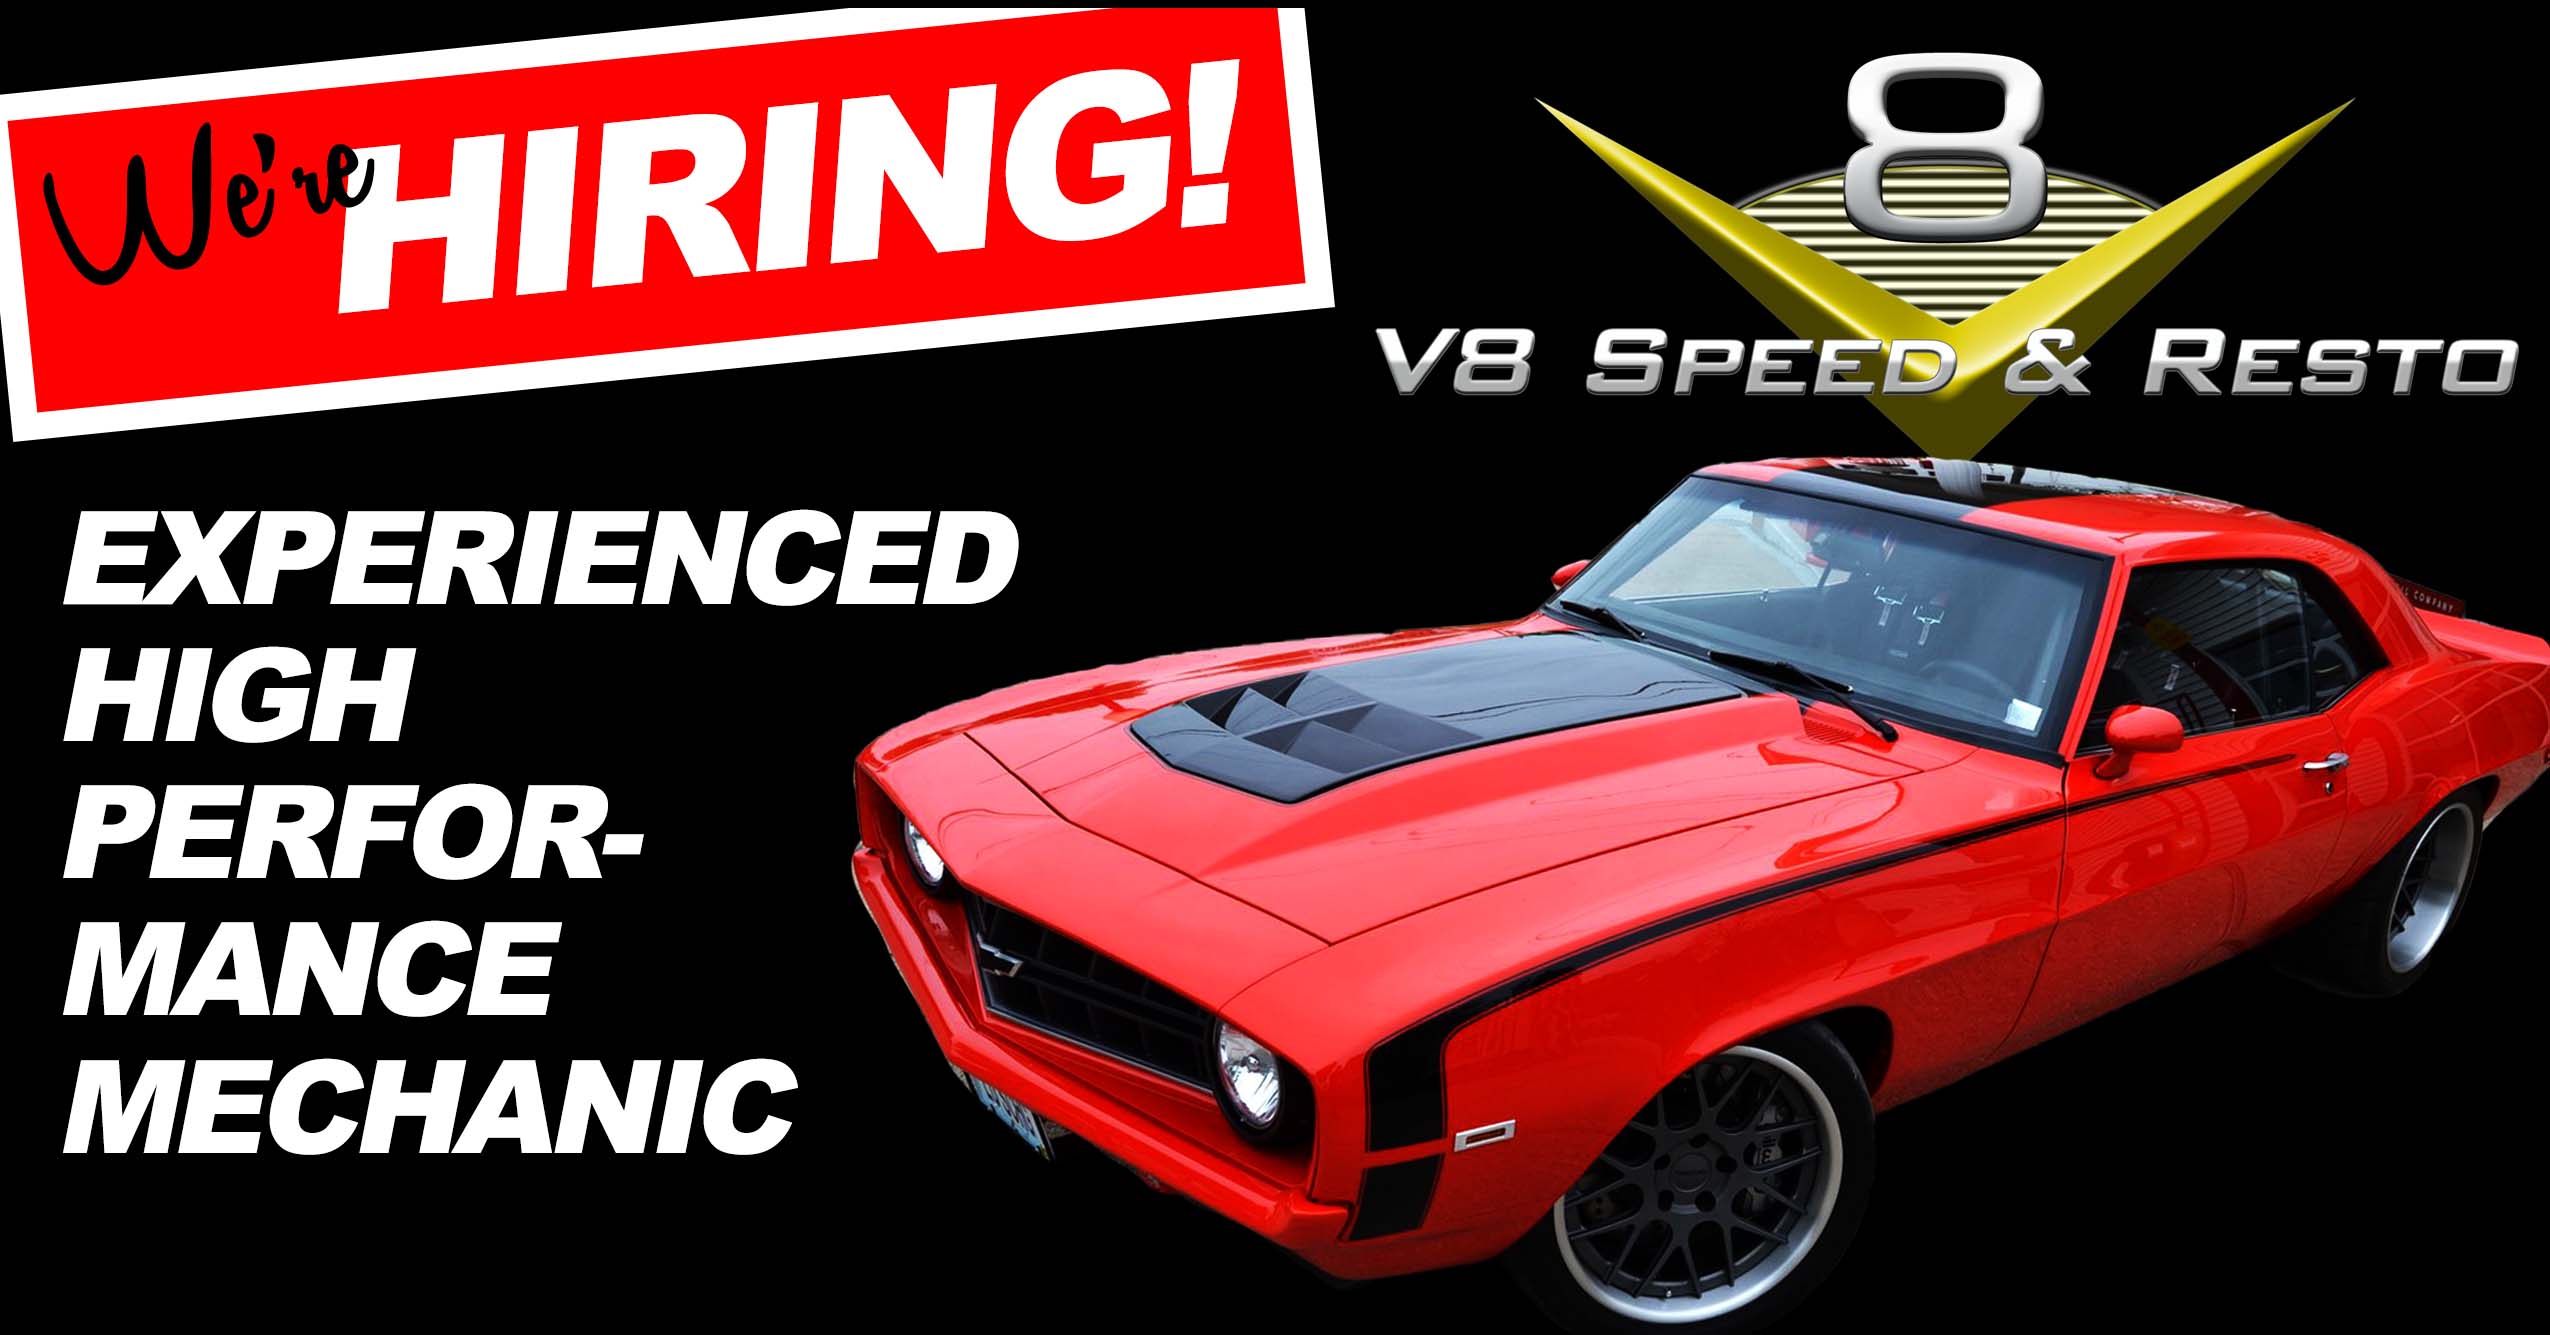 V8 Speed and Resto Shop Seeks Experienced High Performance Mechanic for Restoration and Custom Car Work